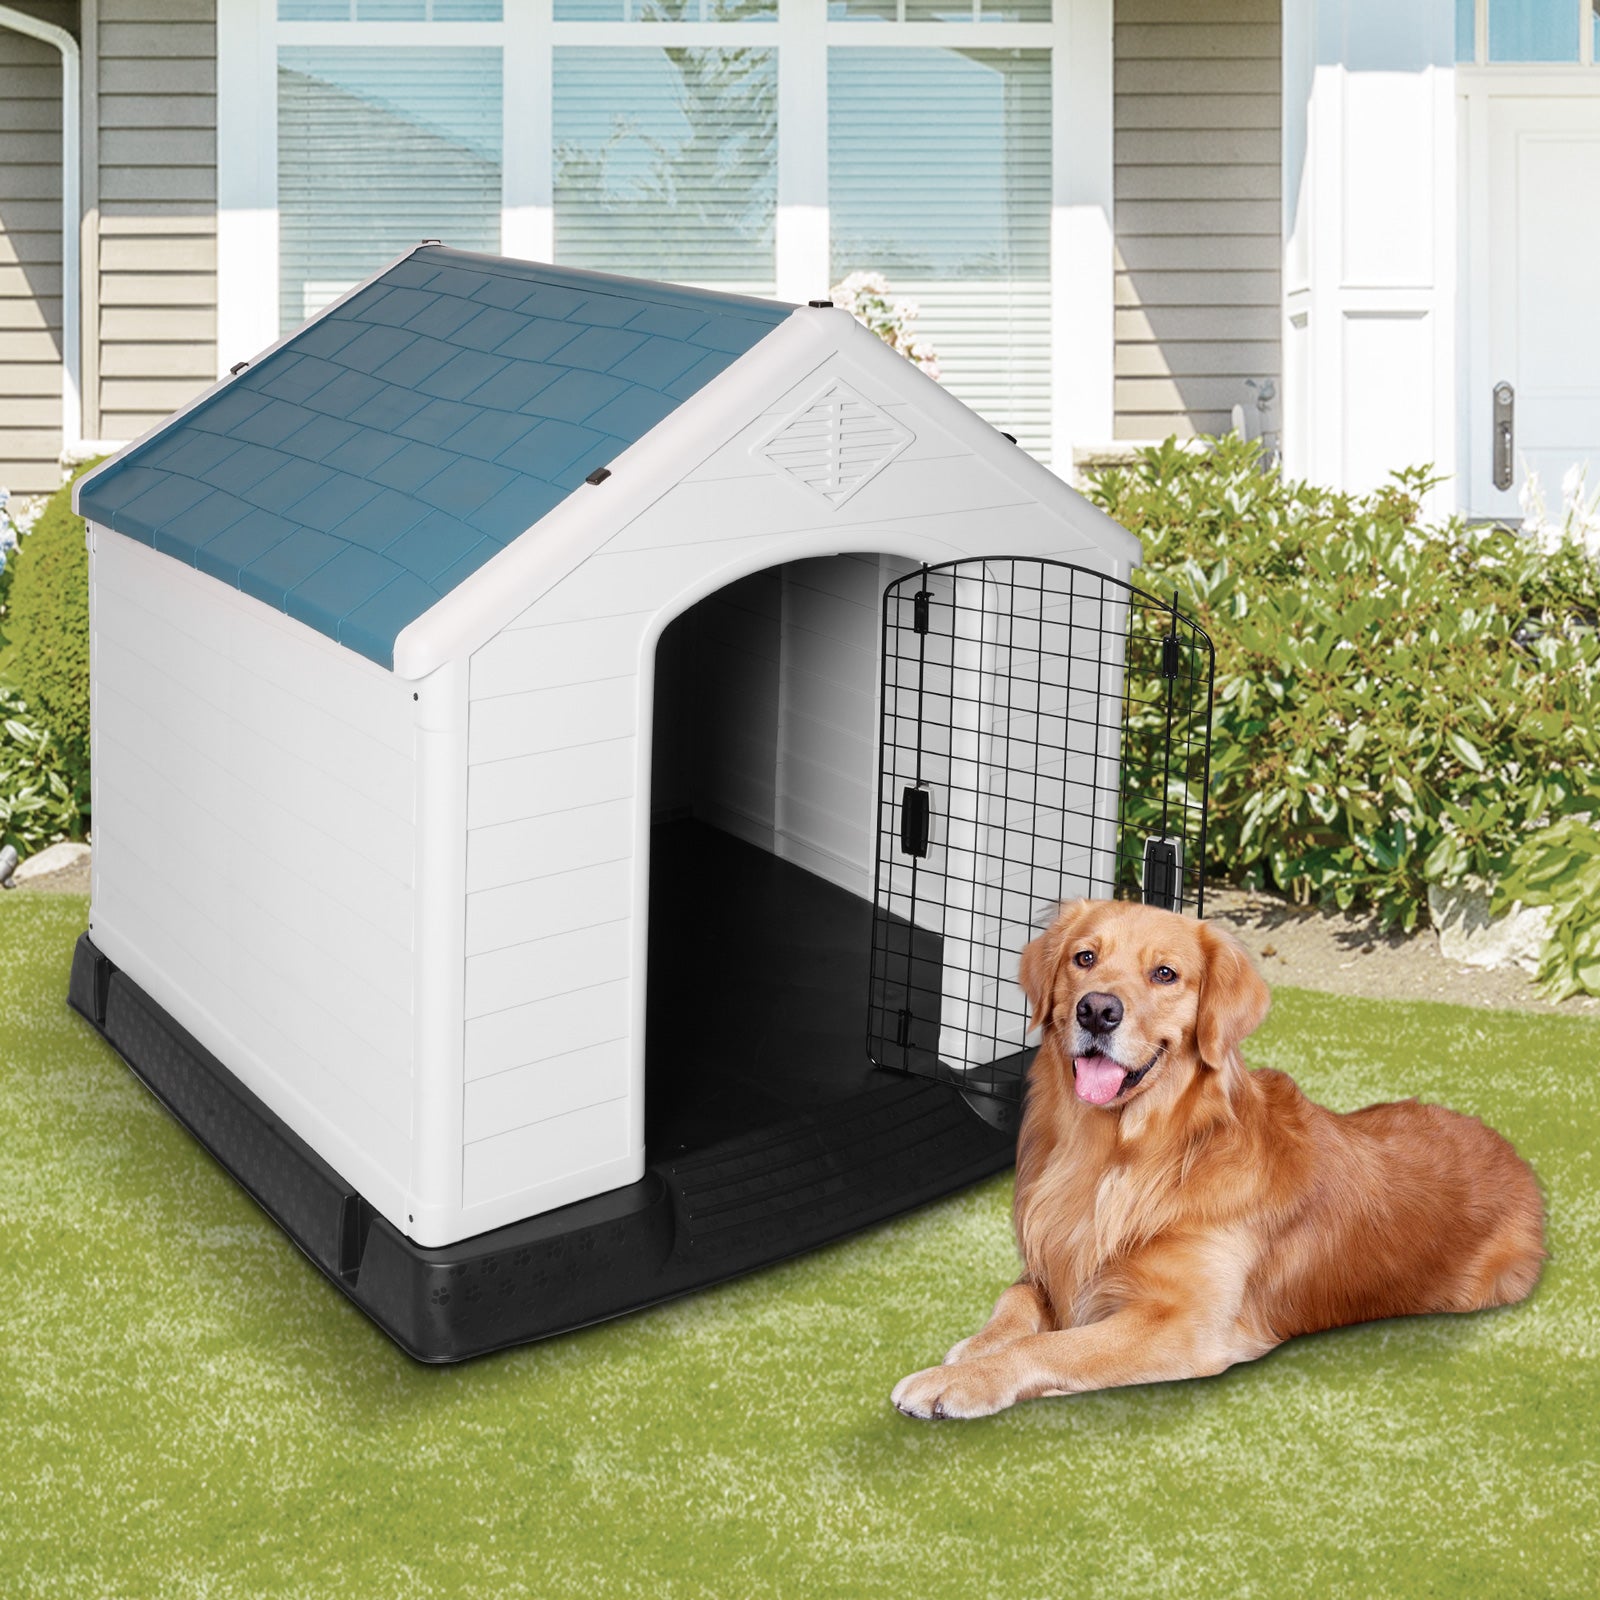 Extra Large Outdoor Dog House Plastic Waterproof Kennel, 42.5"L x 46"W x 45"H